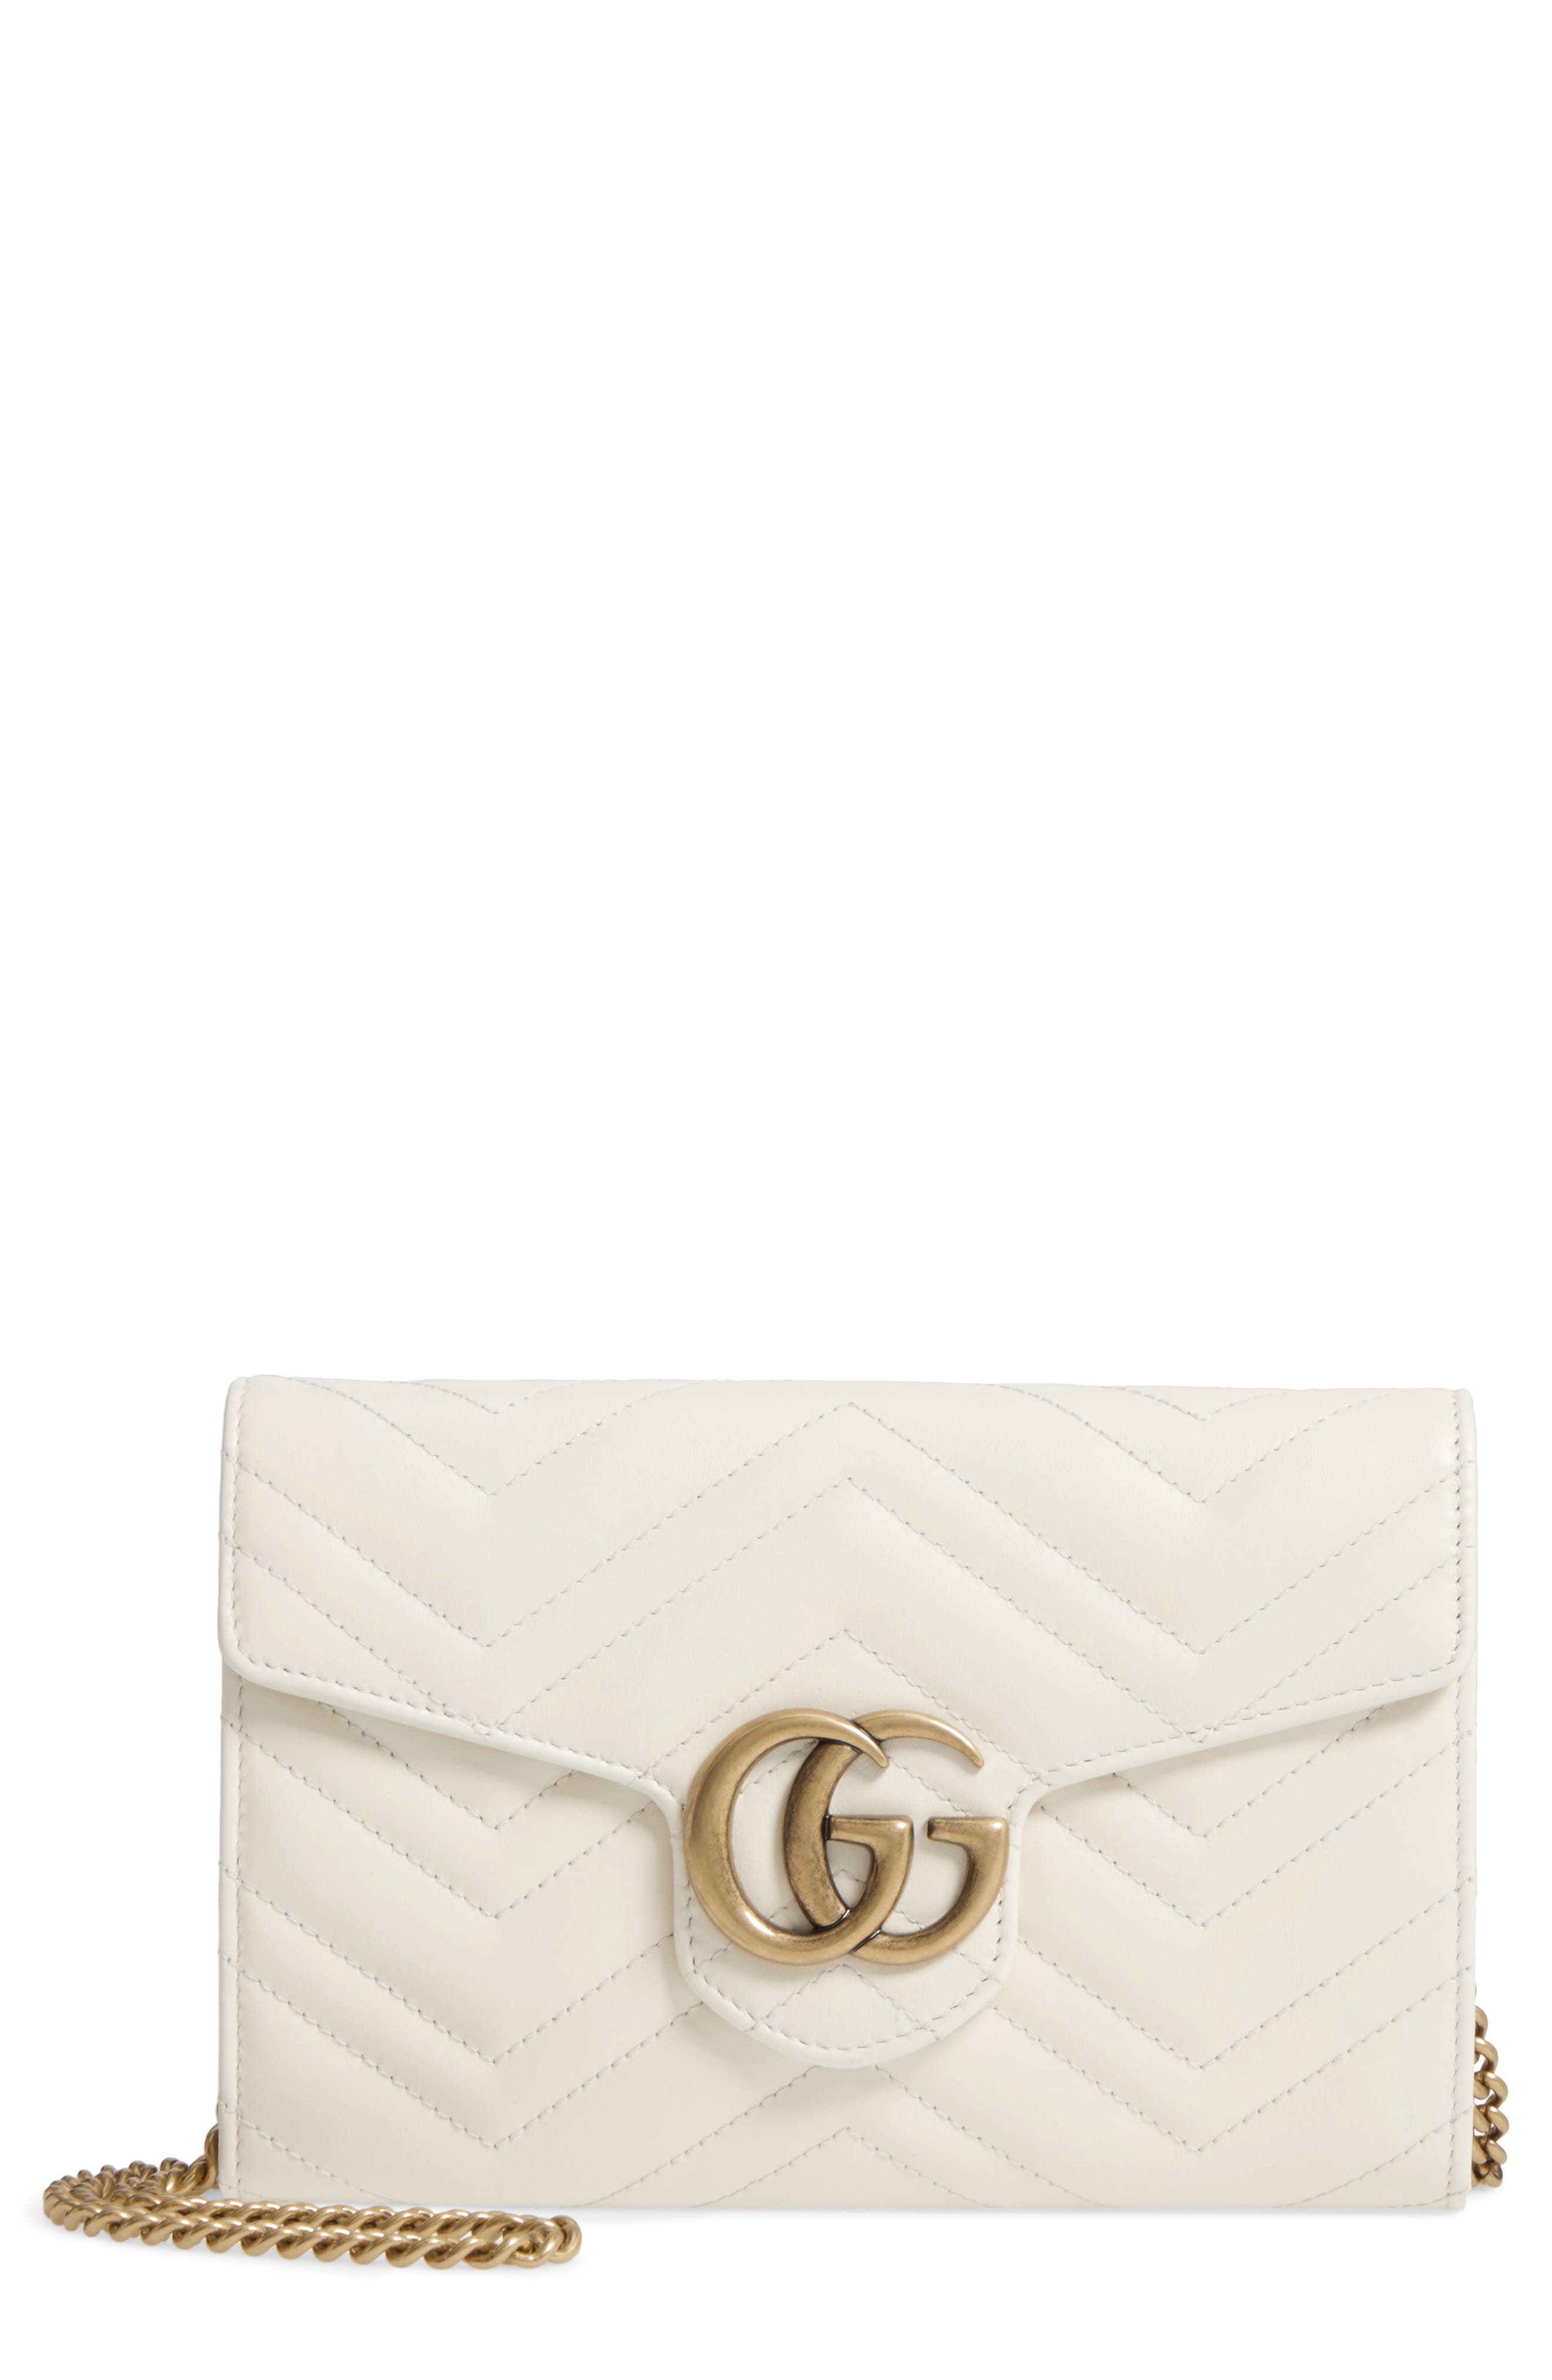 gg marmont leather chain wallet